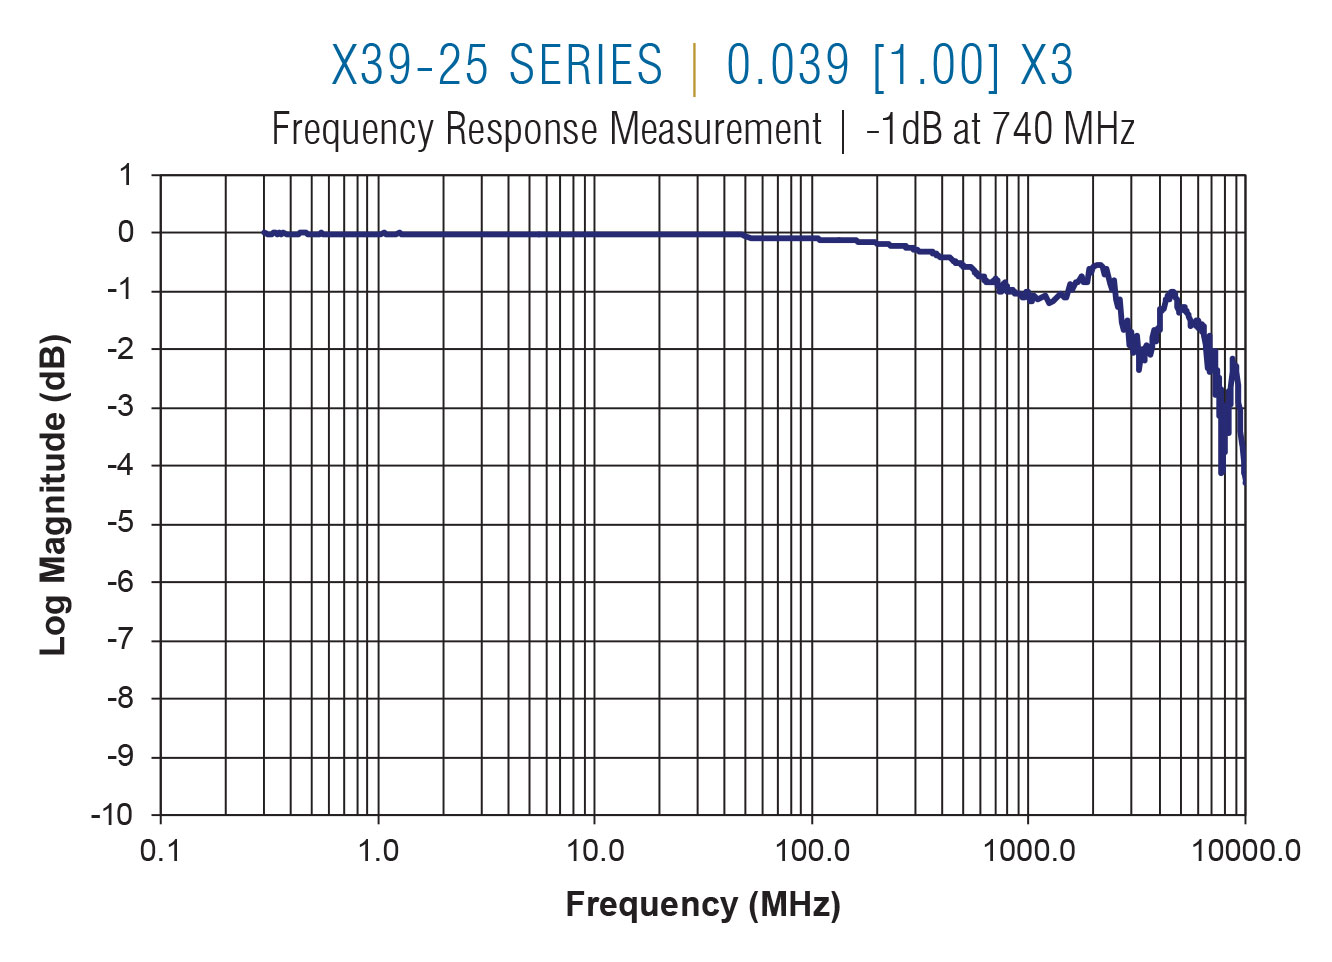 X39-25 Frequency on 0.050 centers x3